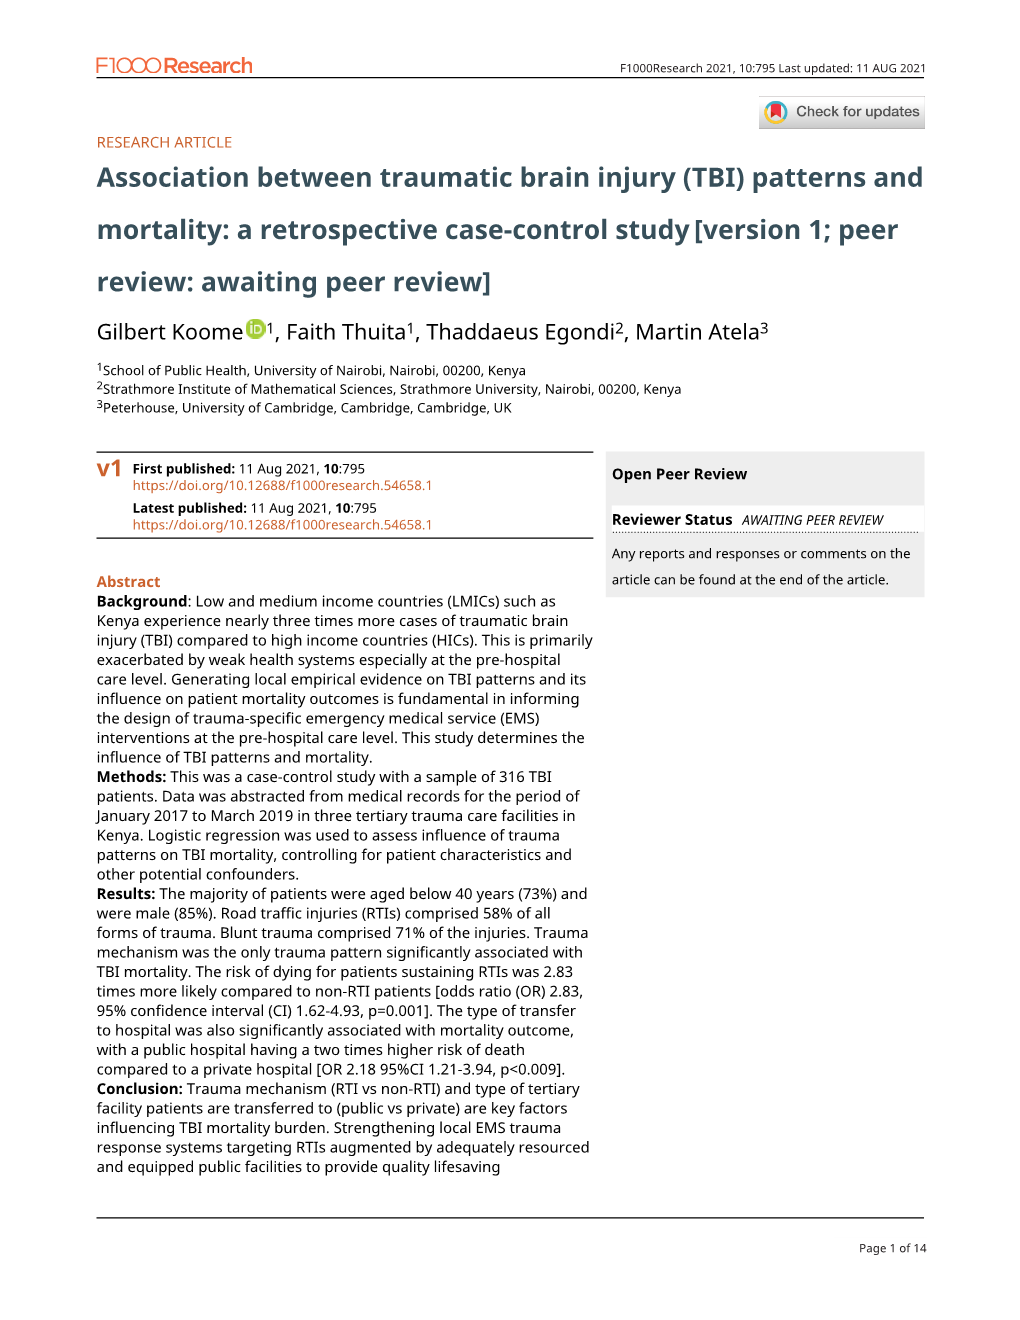 Association Between Traumatic Brain Injury (TBI) Patterns and Mortality: a Retrospective Case-Control Study [Version 1; Peer Review: Awaiting Peer Review]